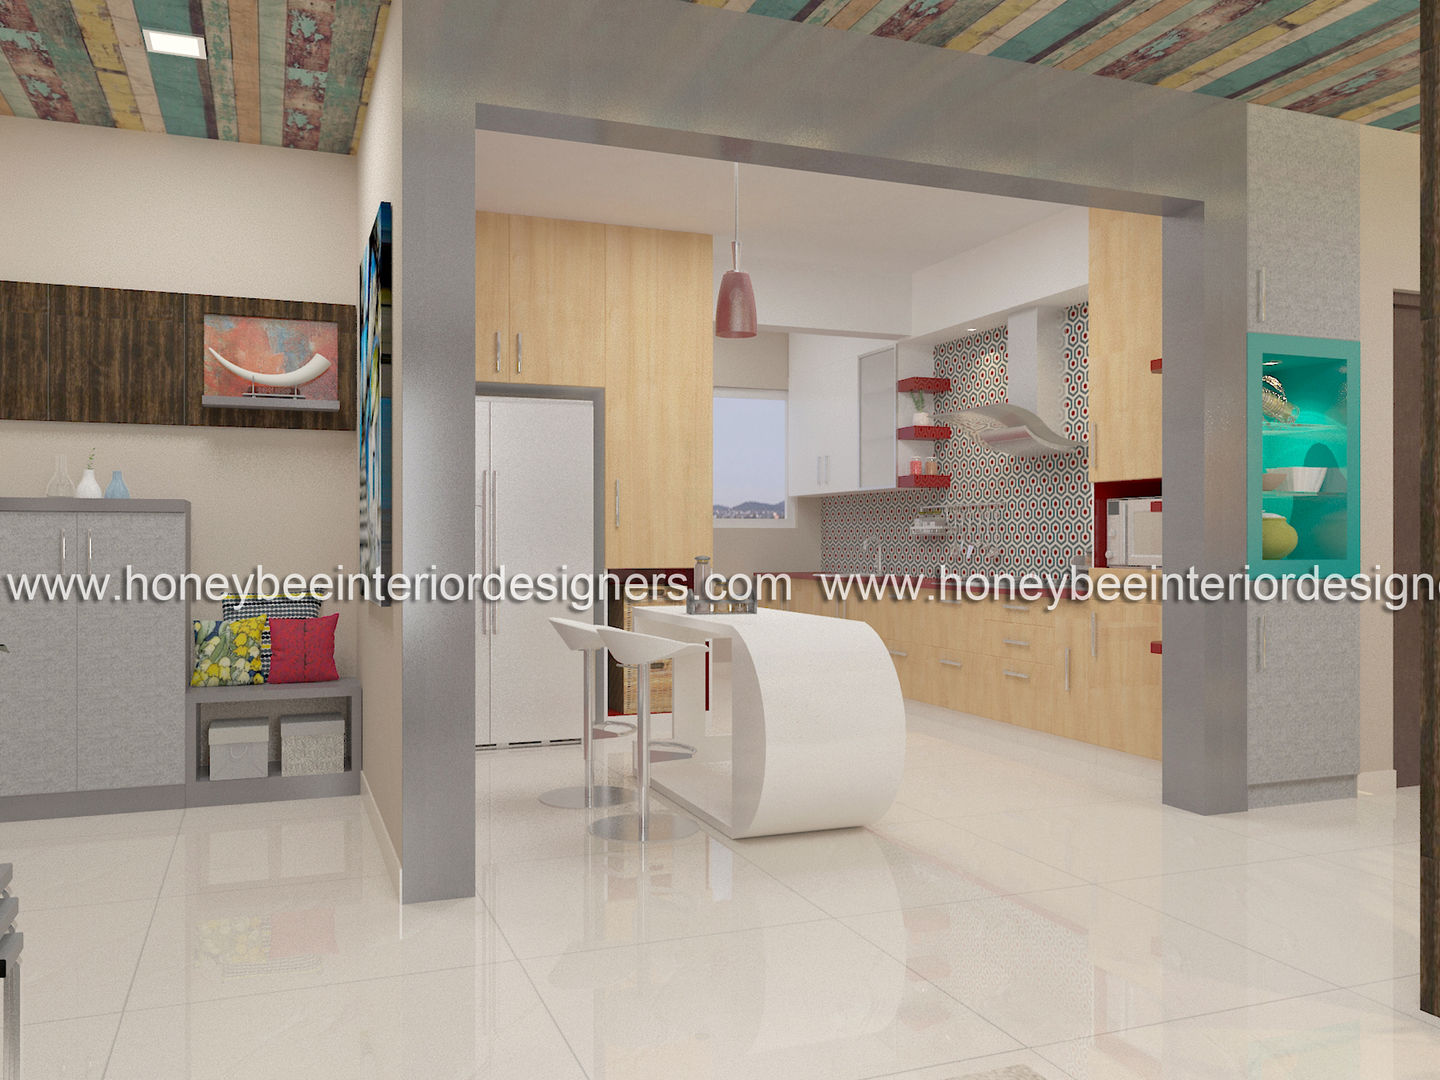 3 BHK Apartment for a young couple, Honeybee Interior Designers Honeybee Interior Designers Keukenblokken